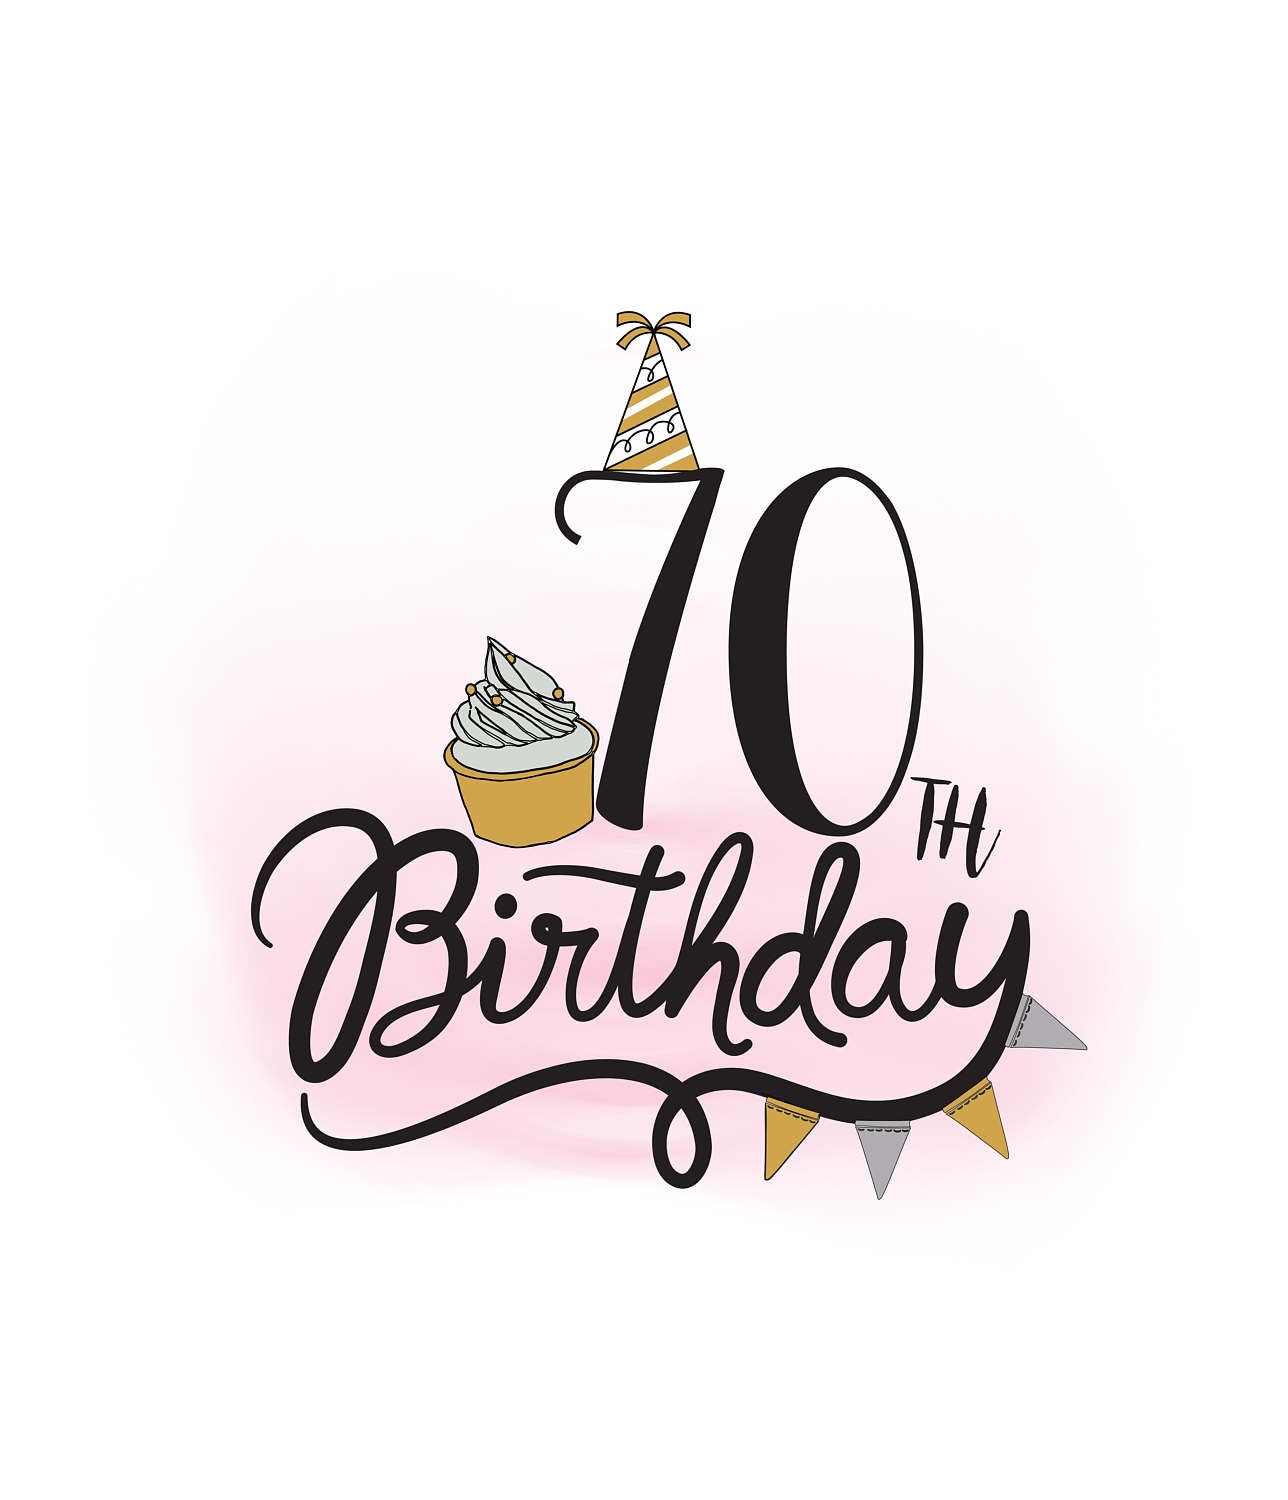 Download 70th Birthday SVG clipart Birthday Quote cupcake svg